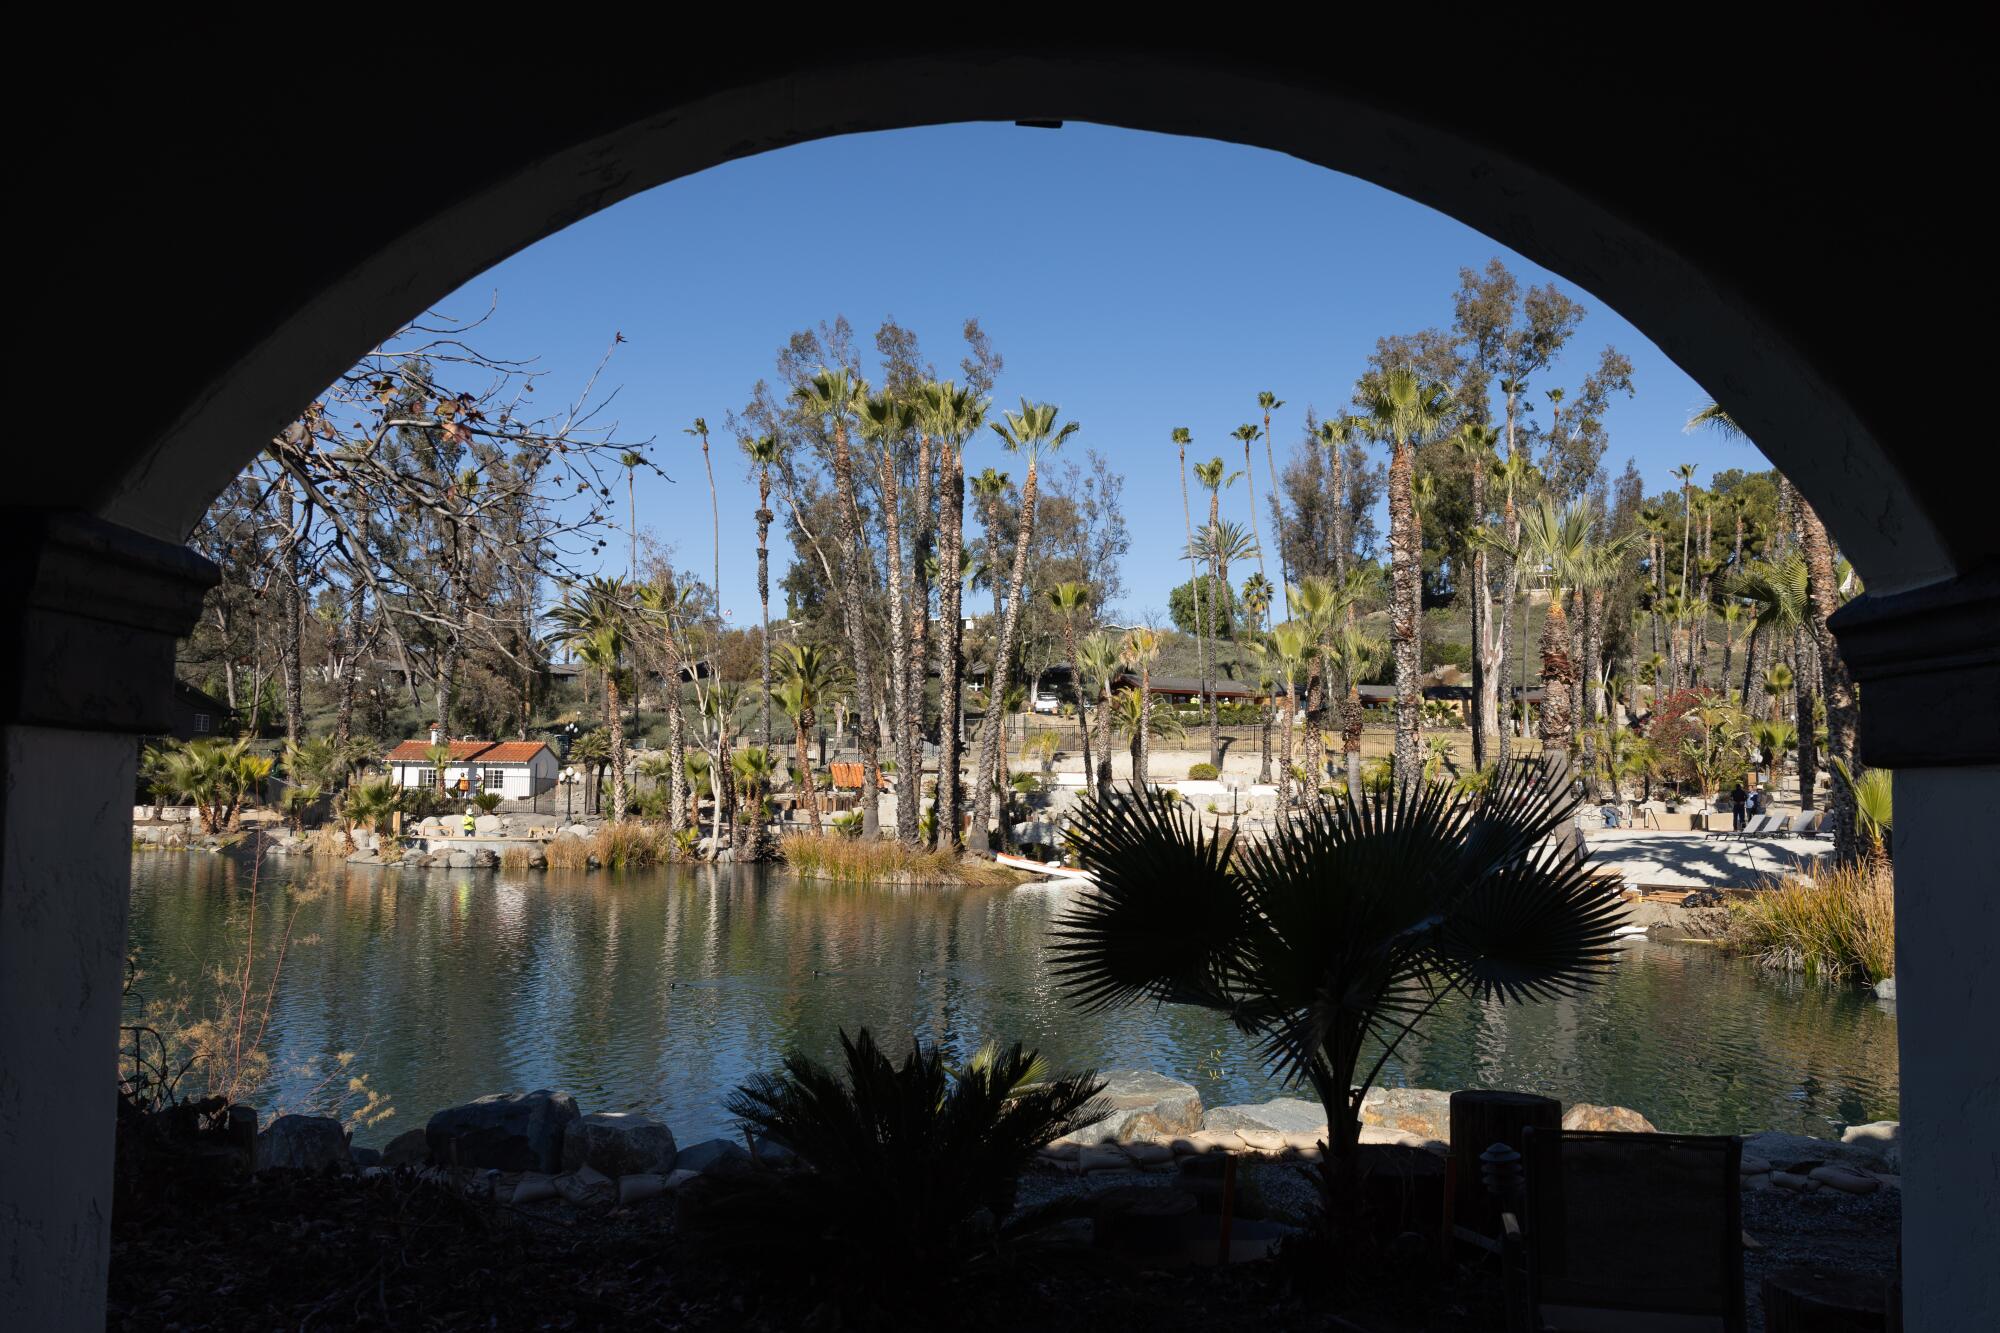 A view through an arch onto a pool of water surrounded by trees, under a blue sky